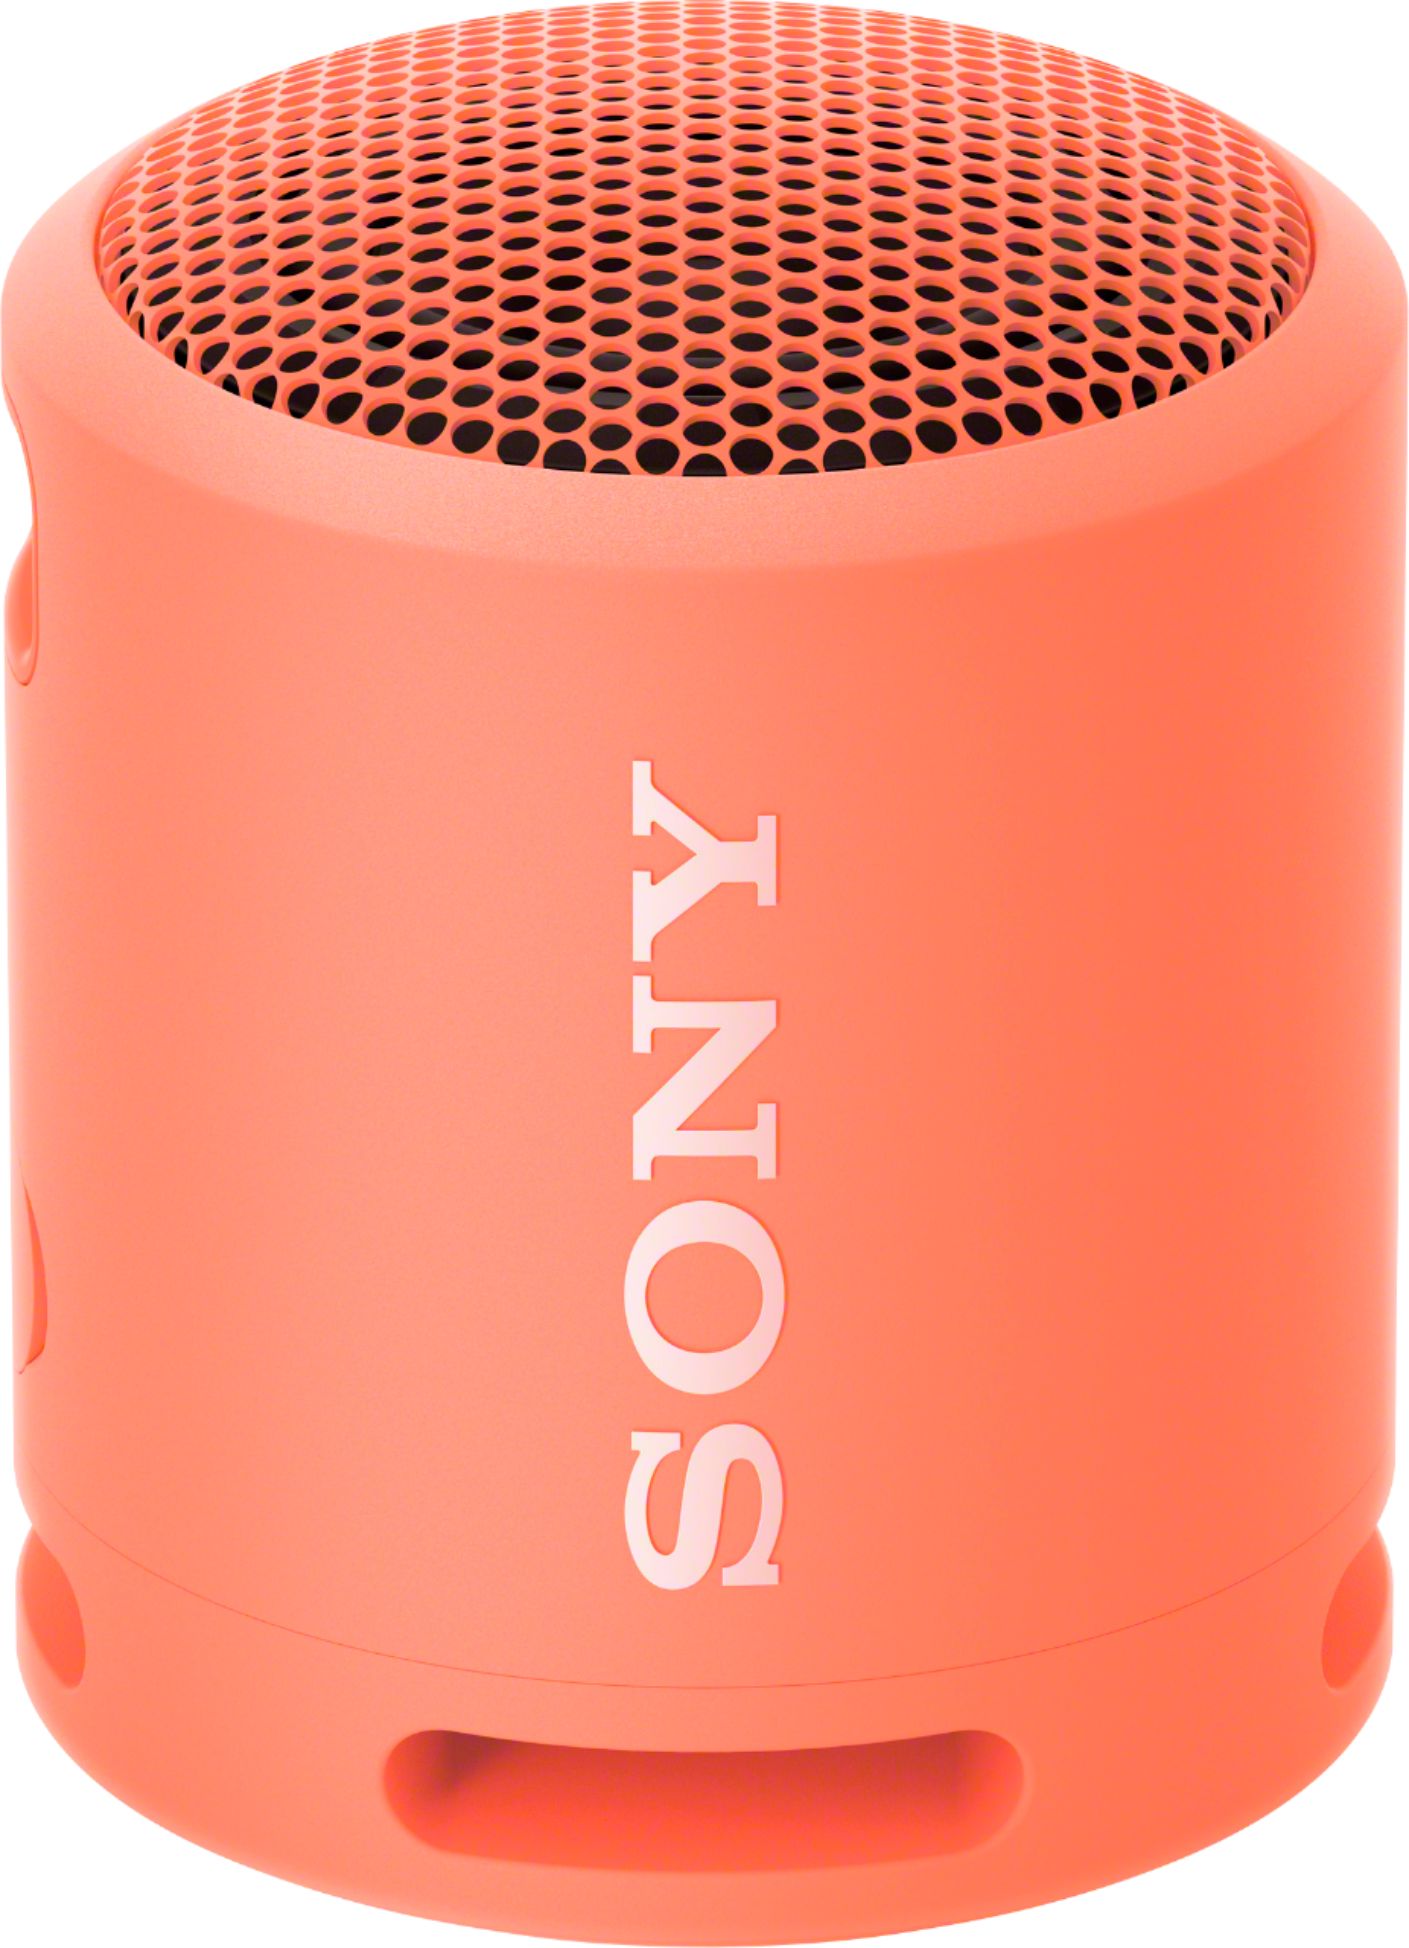 Best Buy: Sony EXTRA BASS Compact Portable Bluetooth Speaker Coral 